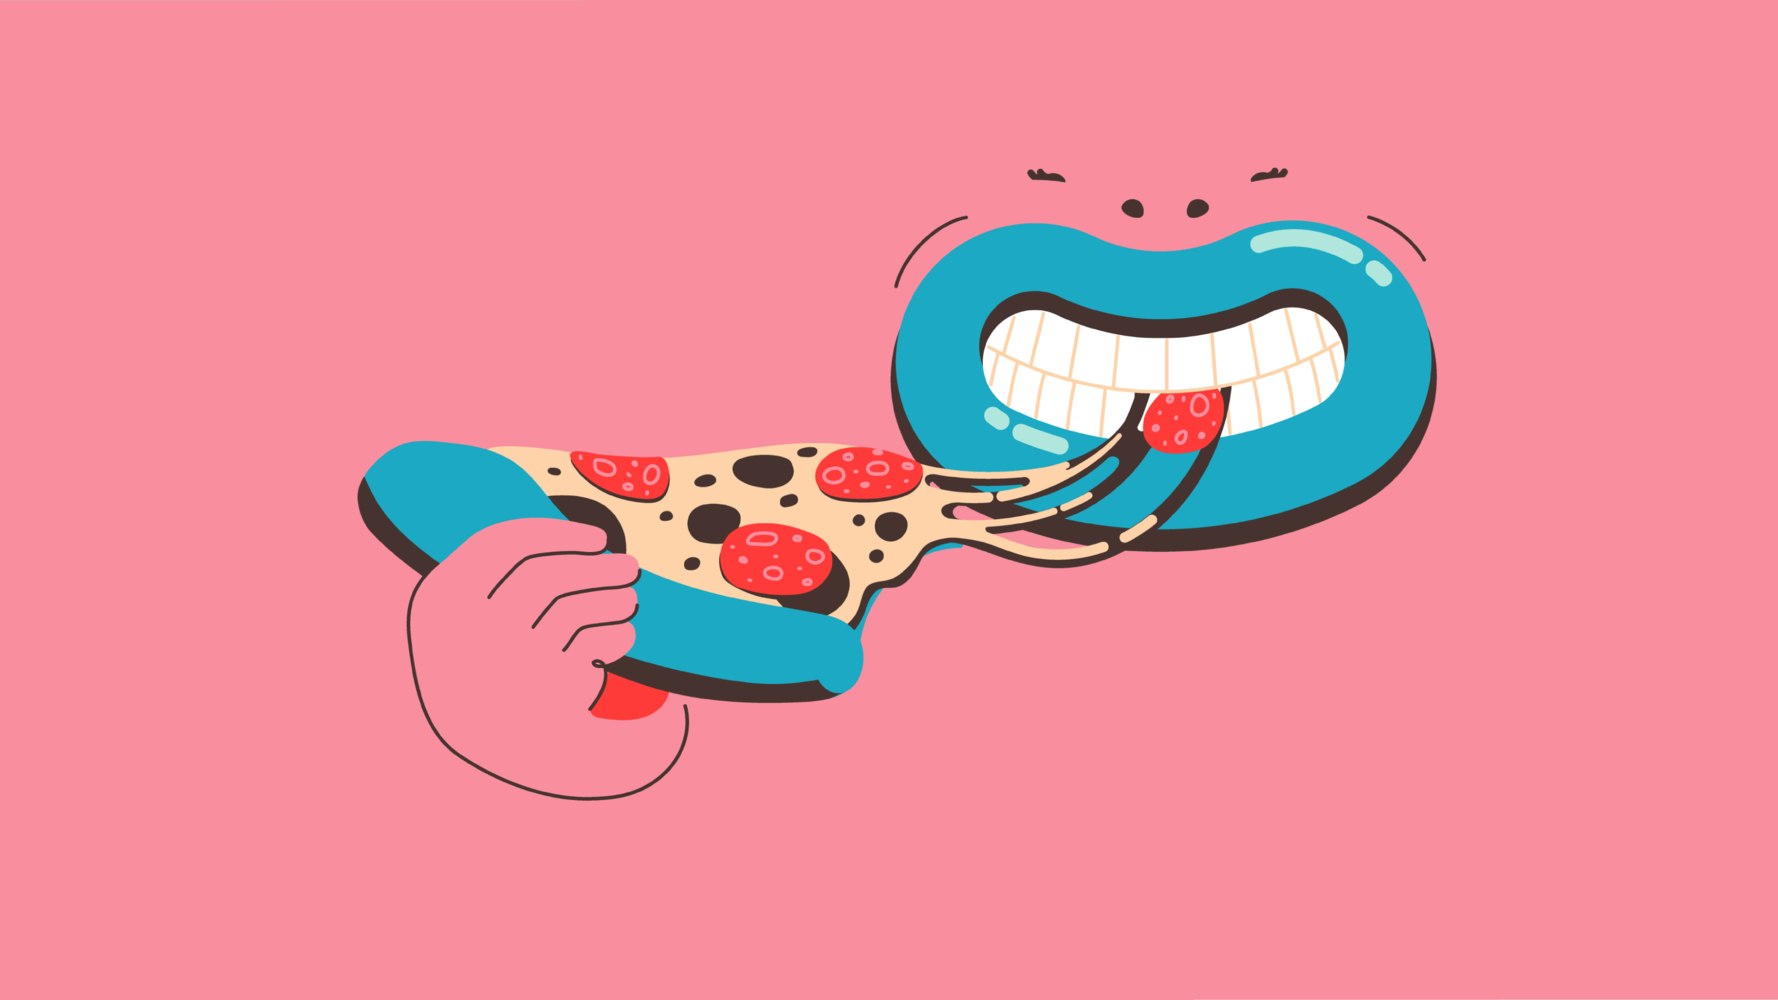 Free Art - Mouth taking a bite of pizza | Mixkit